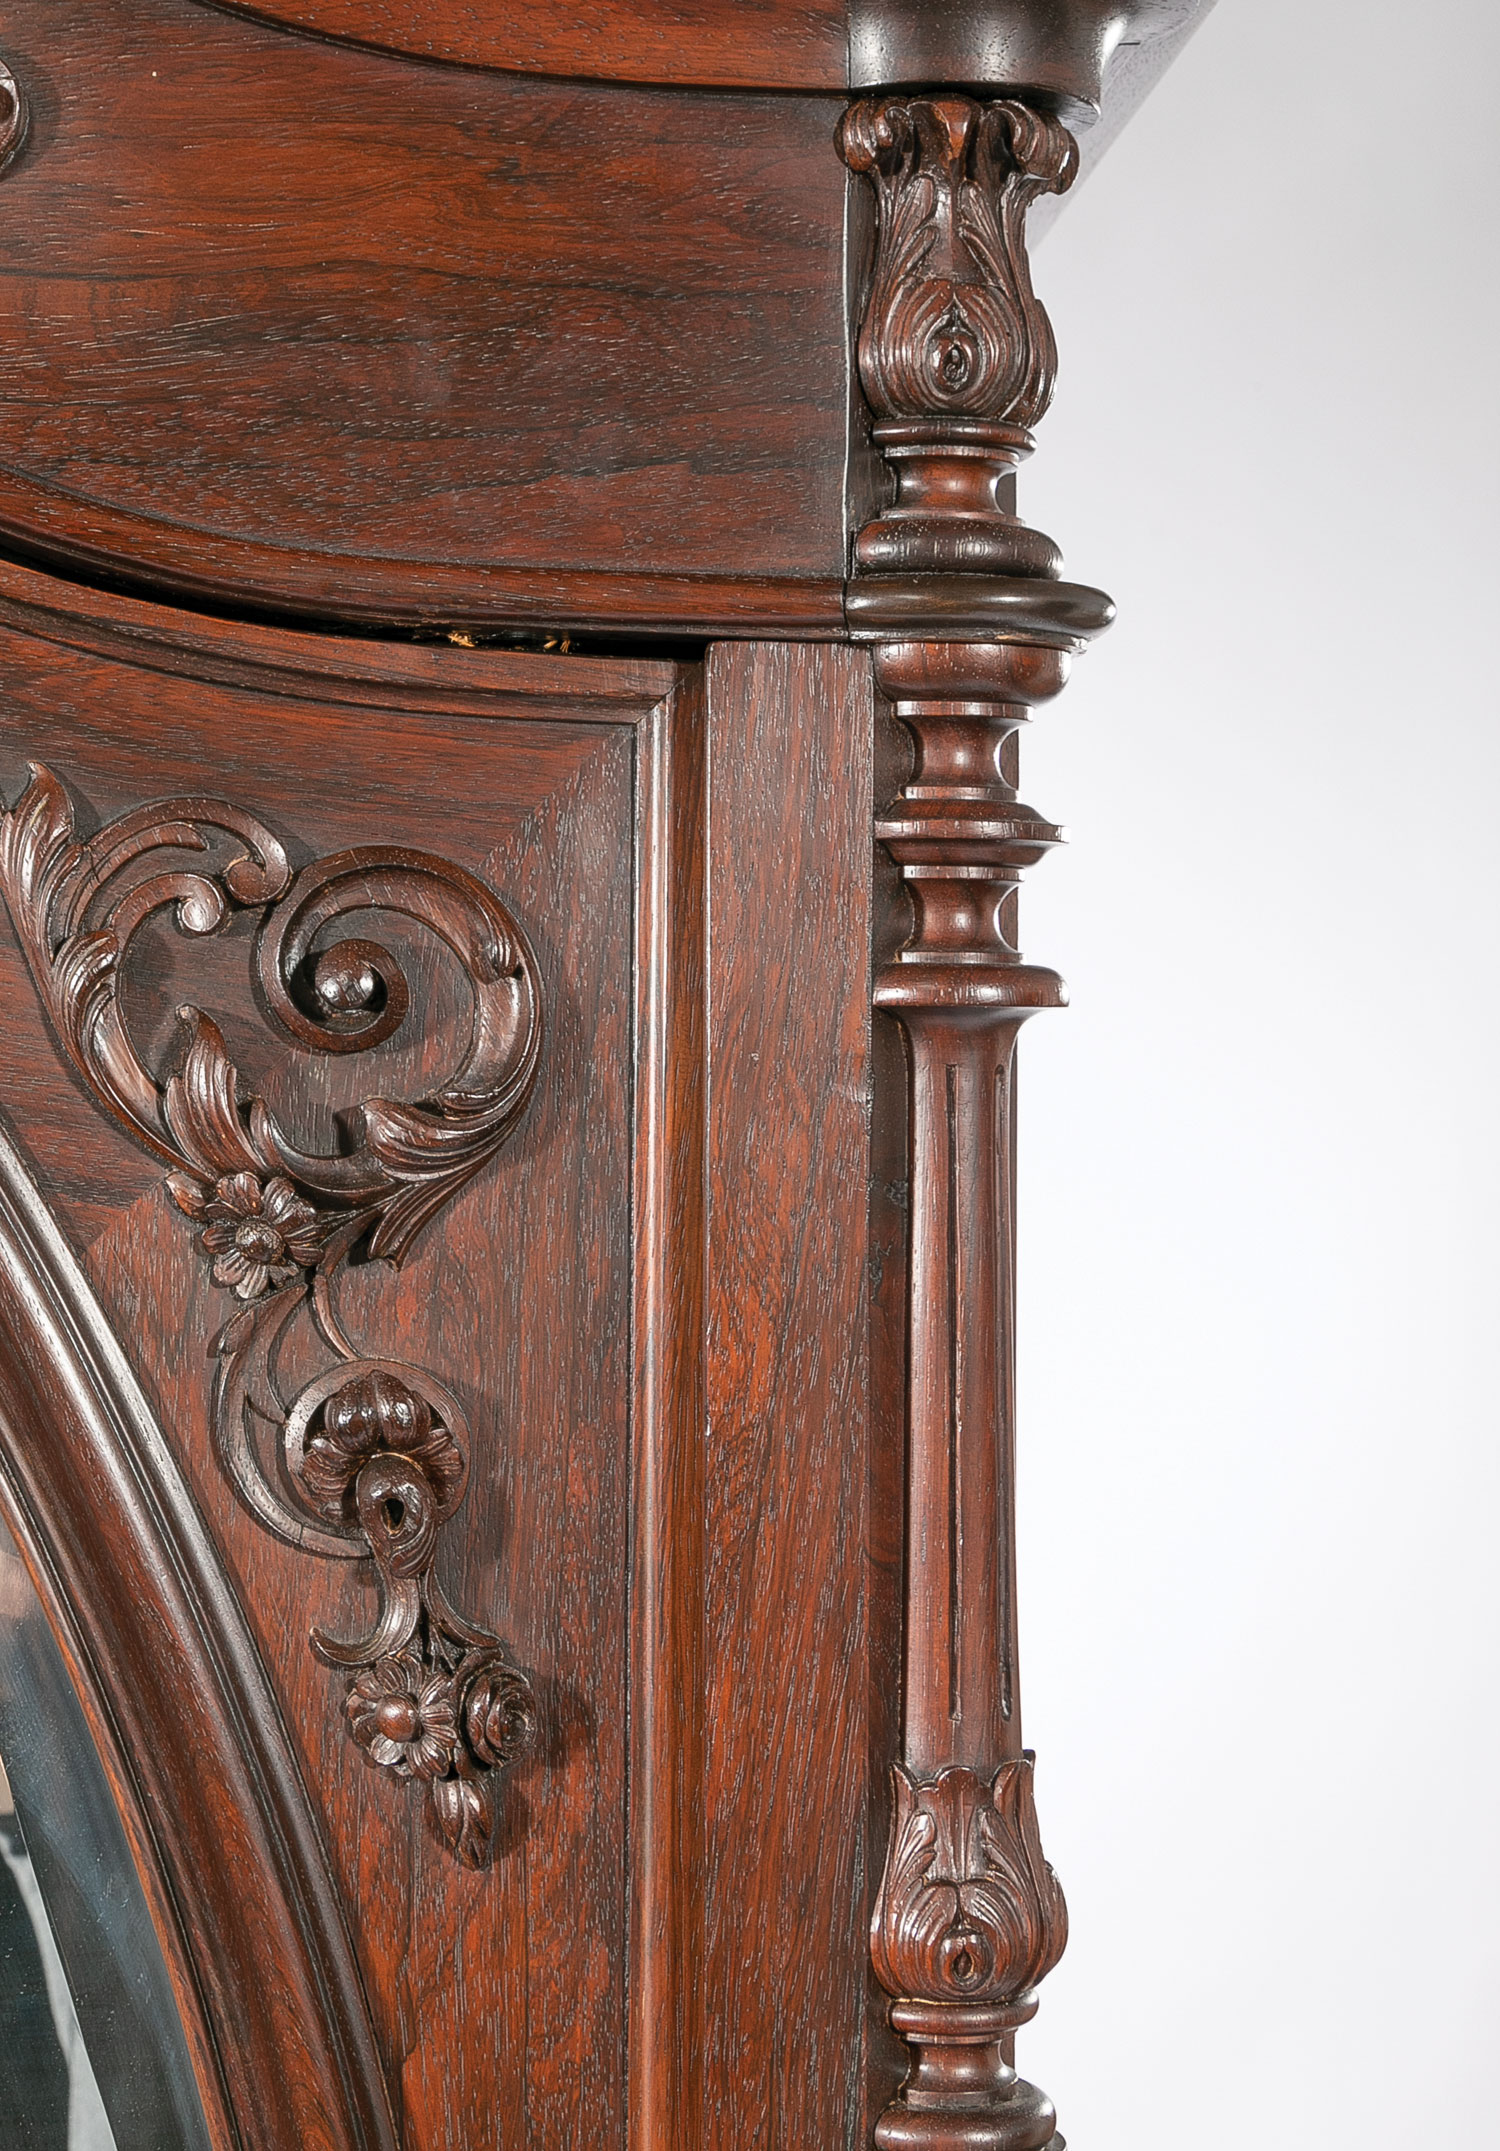 Very Fine American Carved Rosewood Bedroom Suite , mid-19th c., labeled A. (Alexander) Roux, incl. - Image 13 of 20